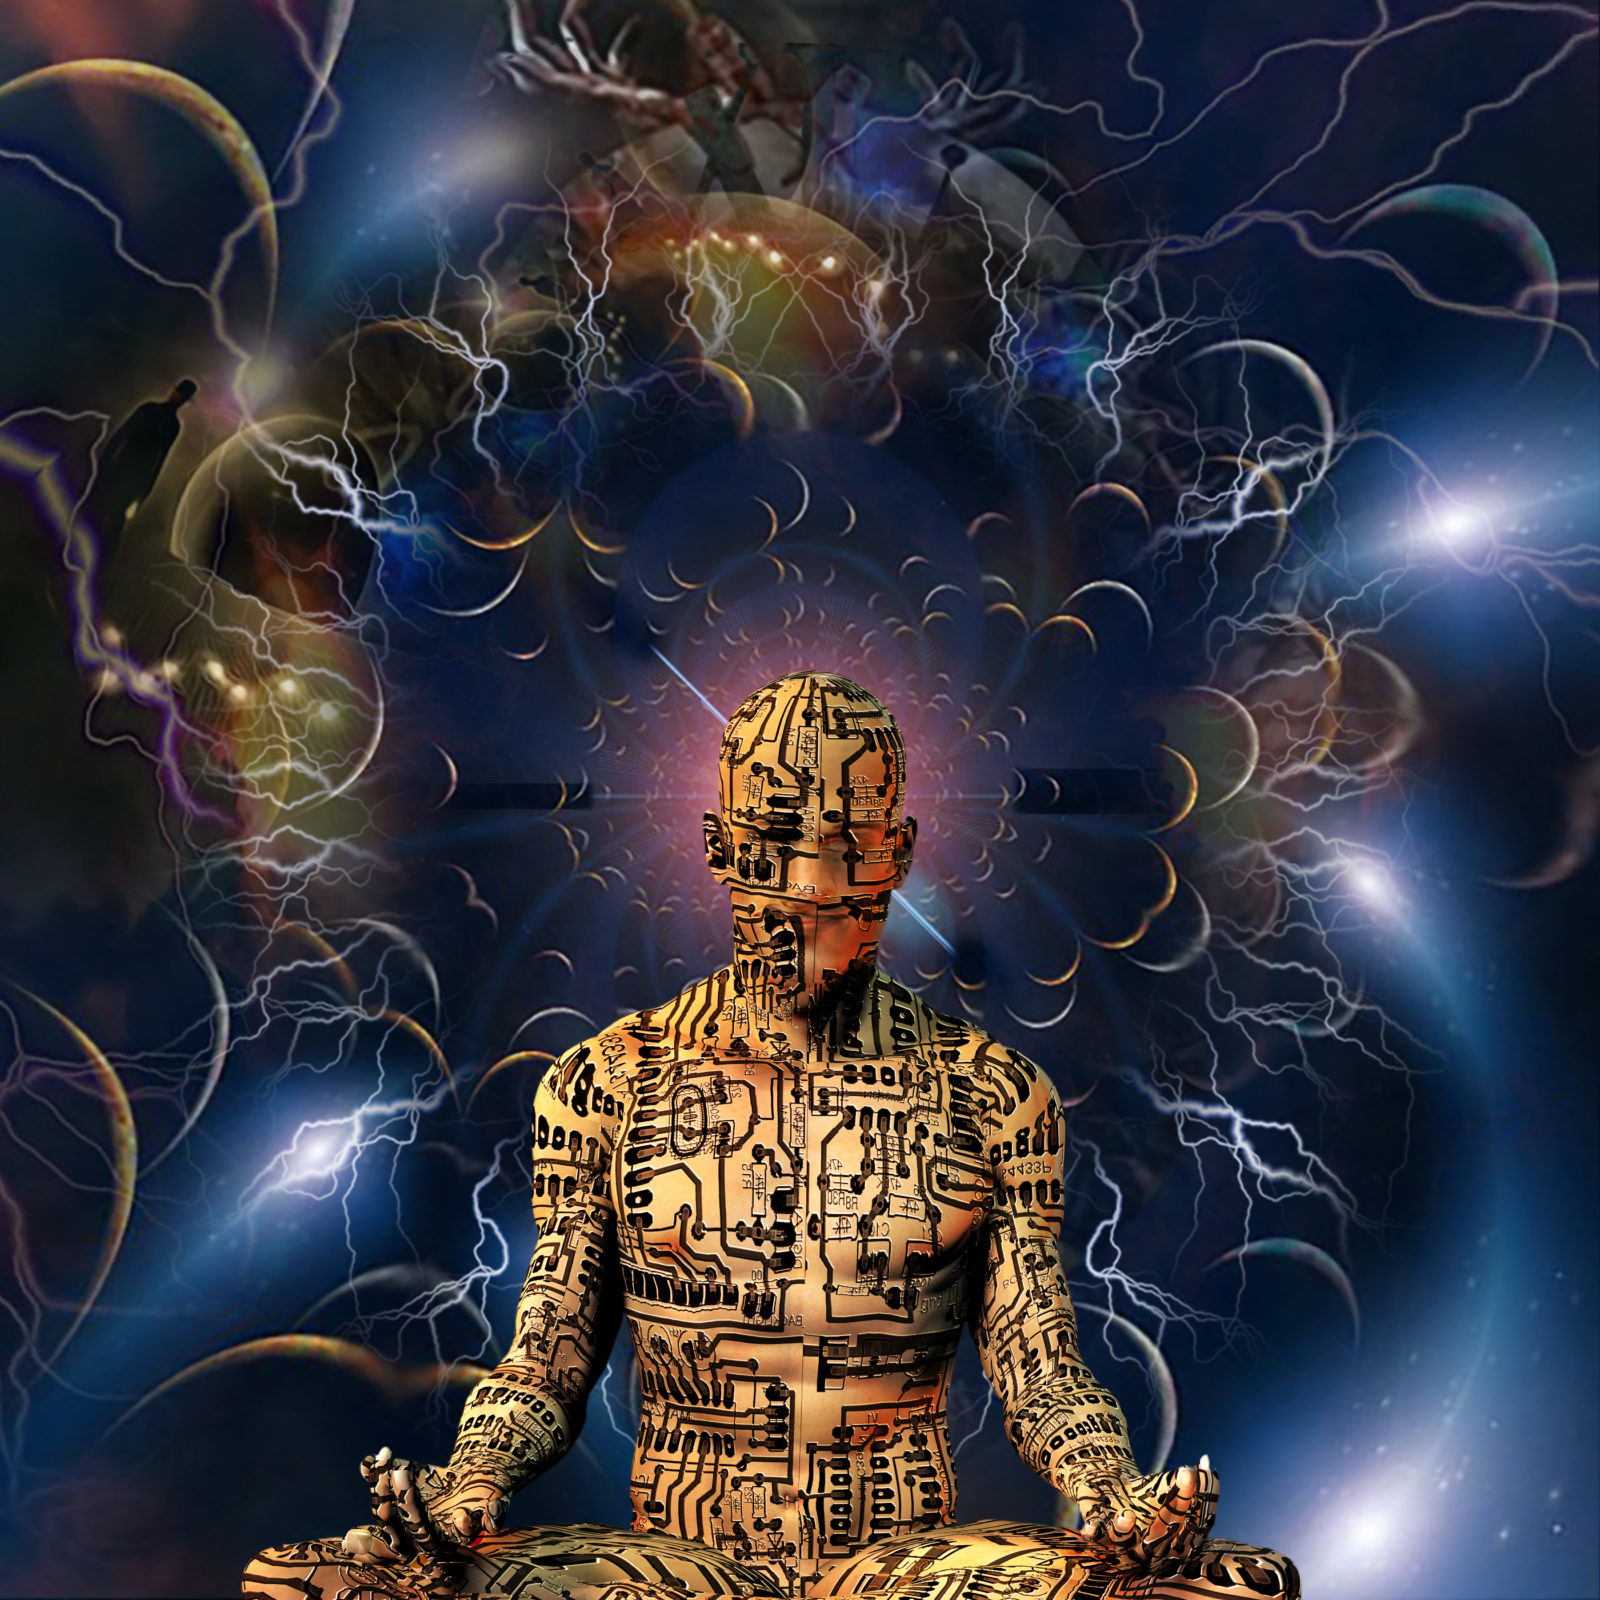 Cyborg Meditation. Droid in lotus pose in endless space